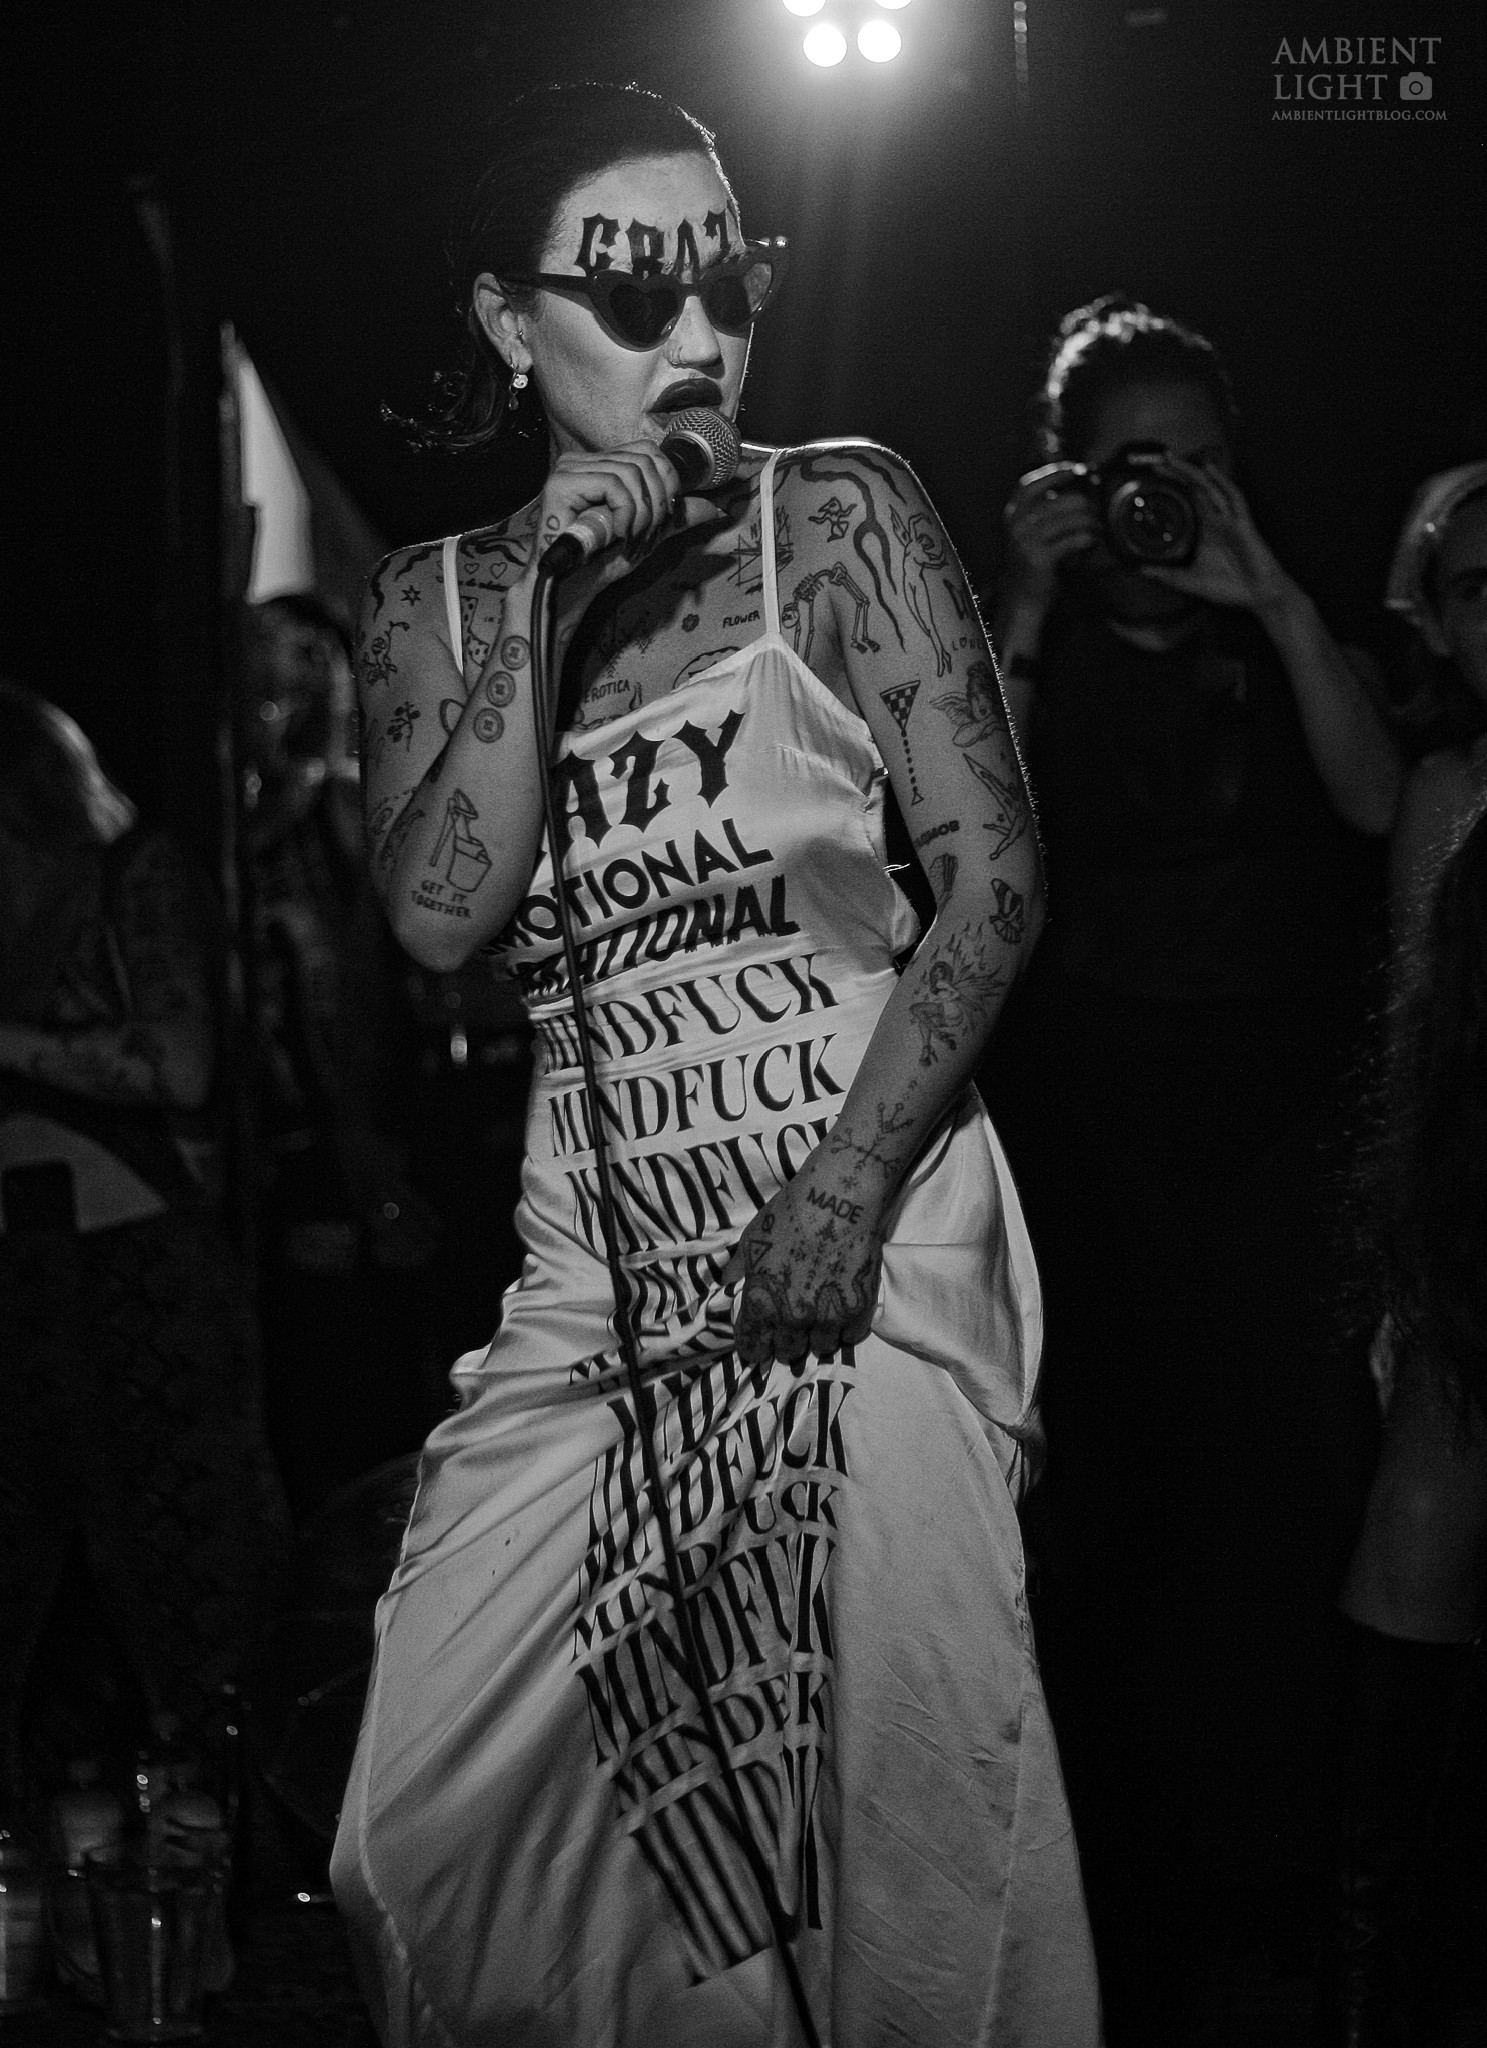 Concert Review: Brooke Candy, Auckland New Zealand, 2019